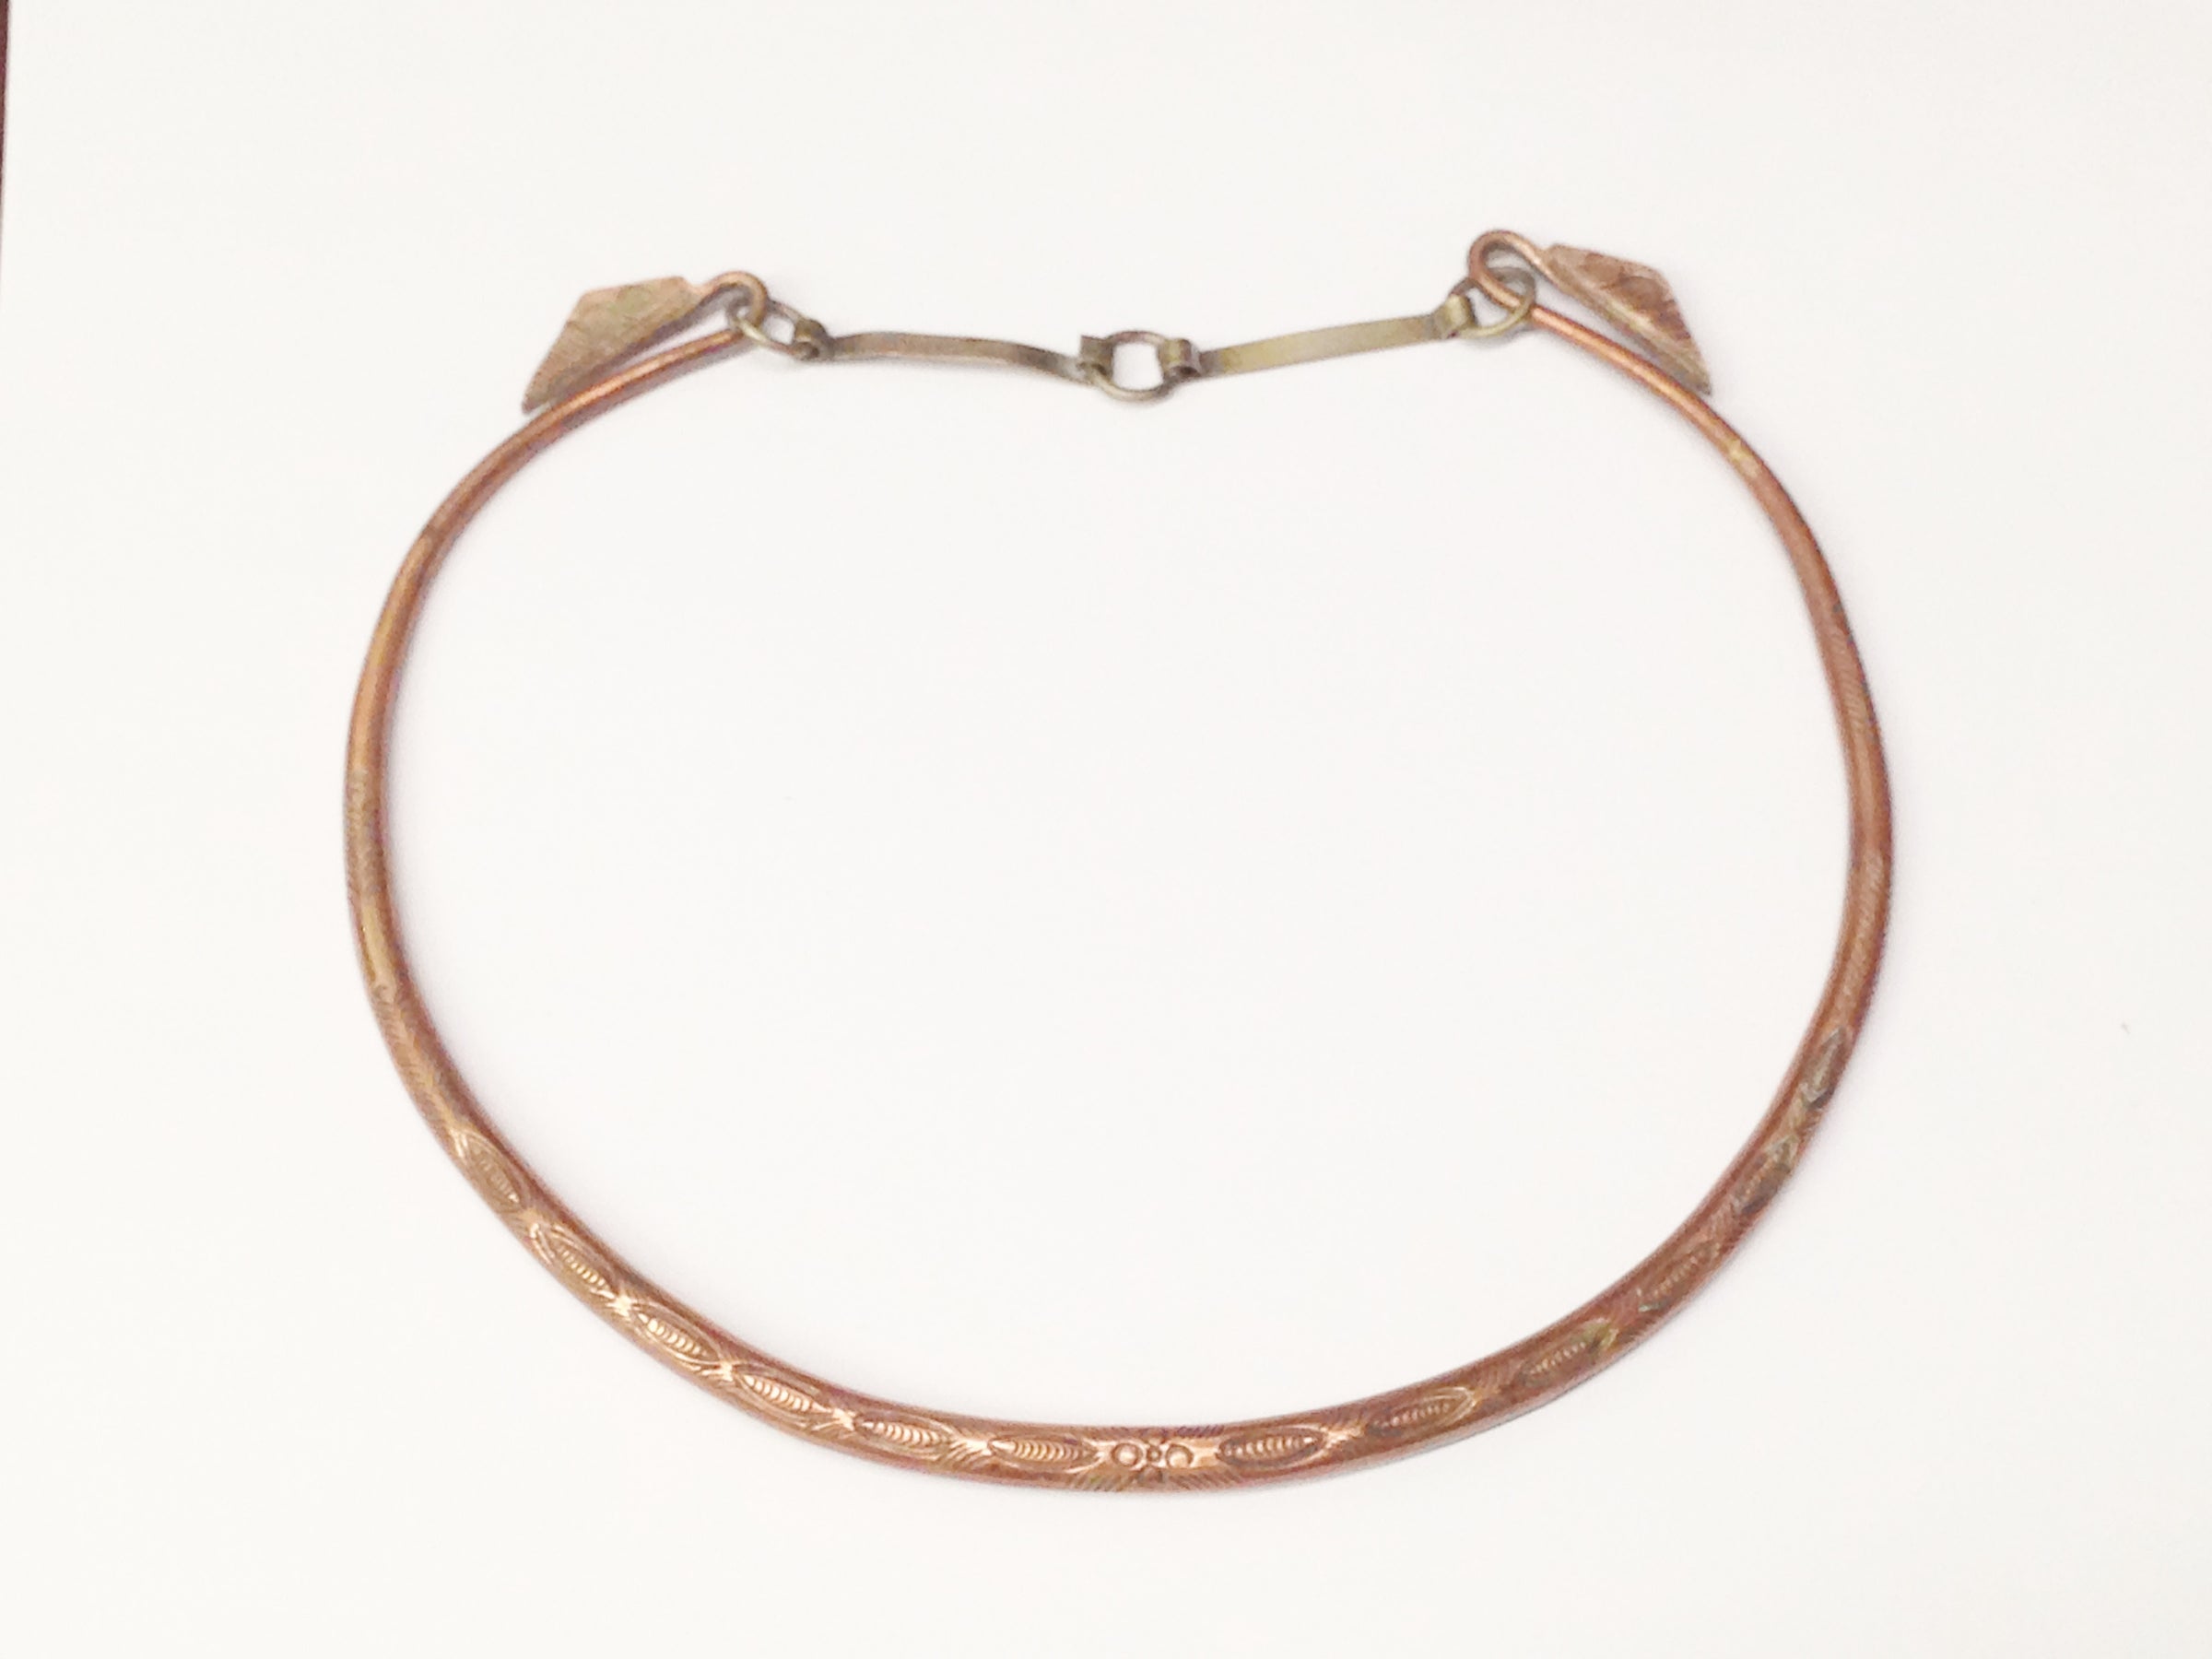 Antique Stamped Copper Tribal Choker Necklace - Hers and His Treasures